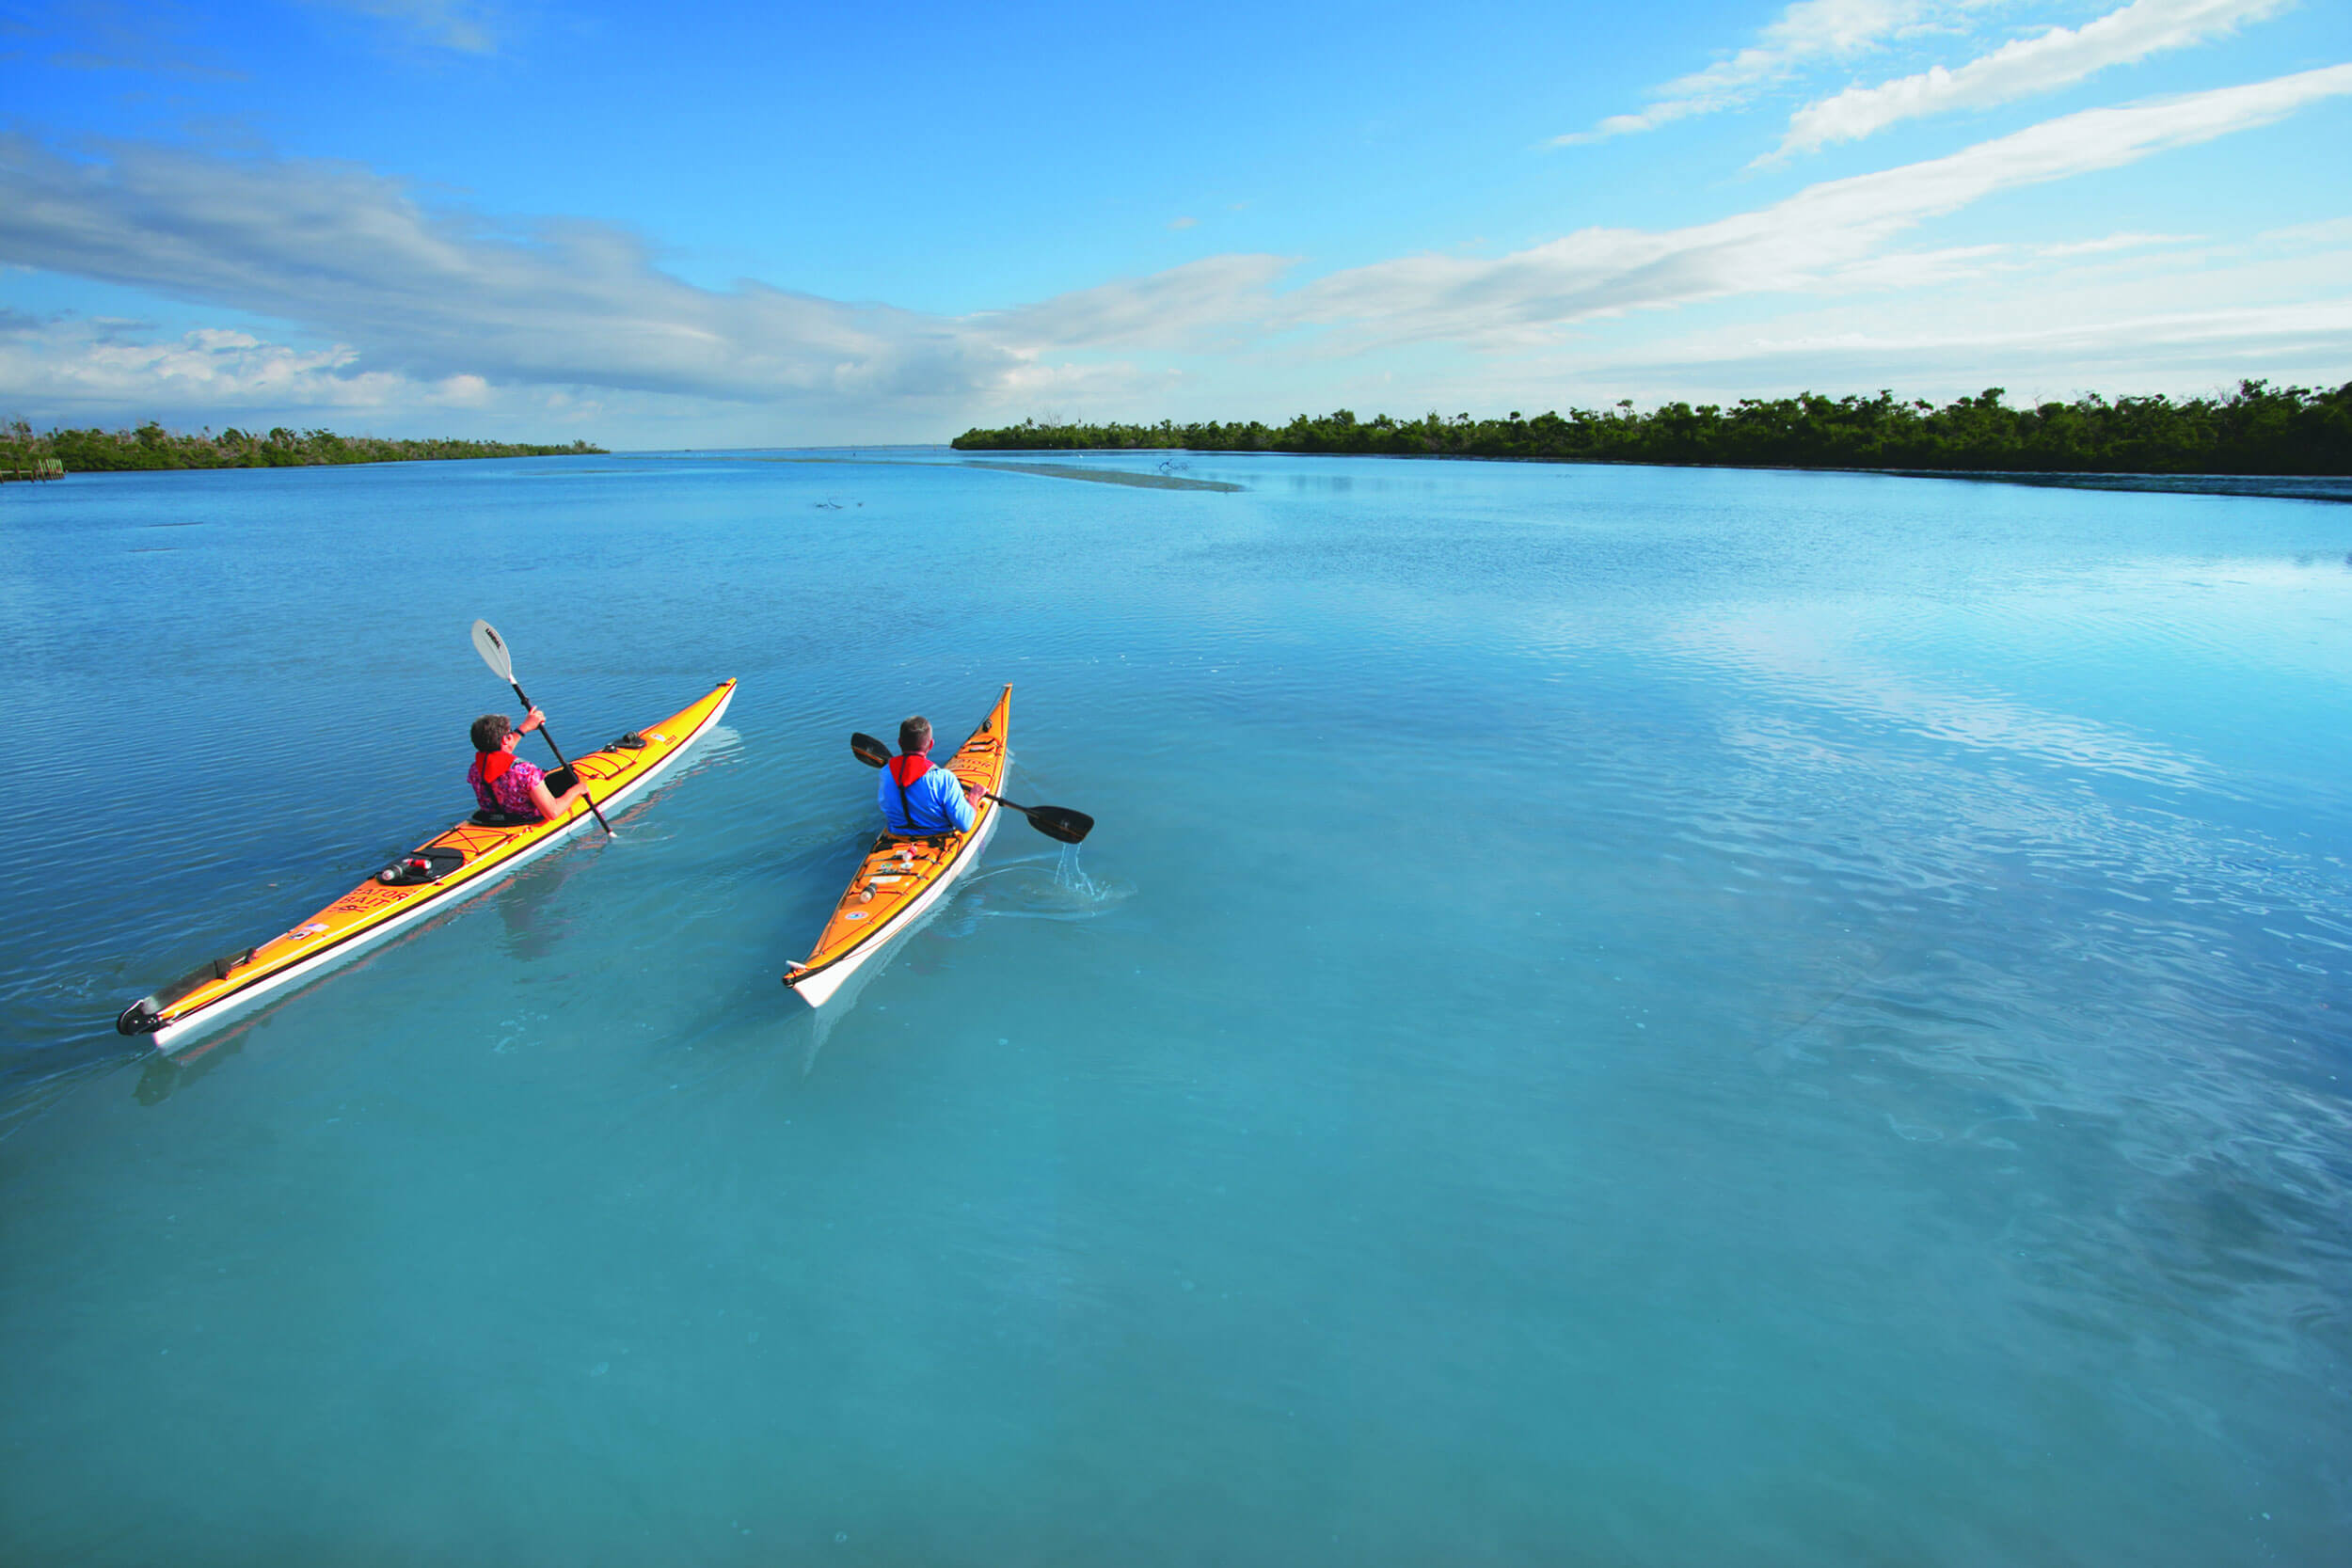 Two people kayak in bright blue bay.